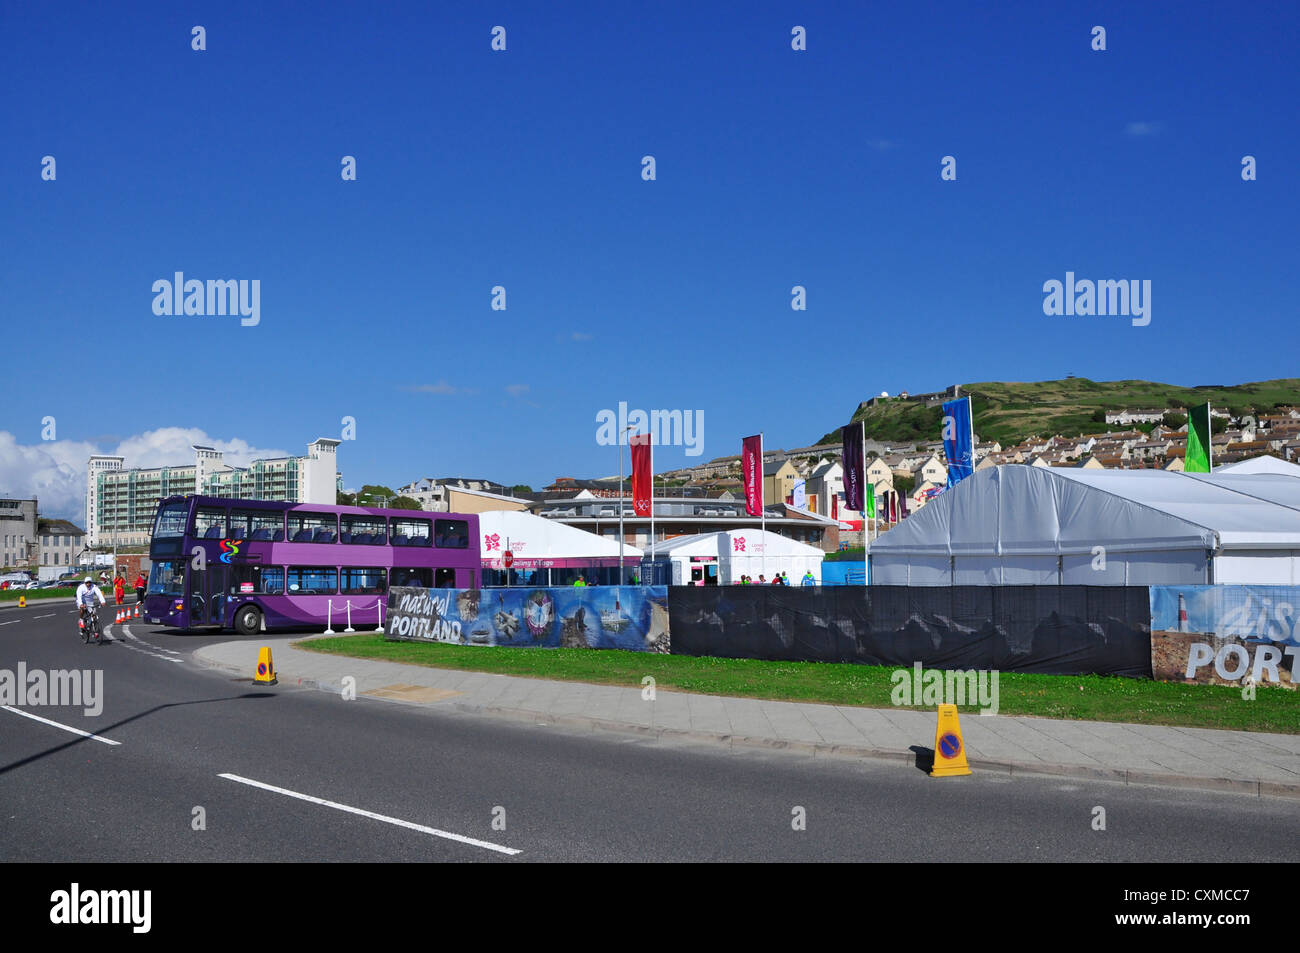 Olympic village at Portland, the place of 2012 Olympics sailing sport. Stock Photo